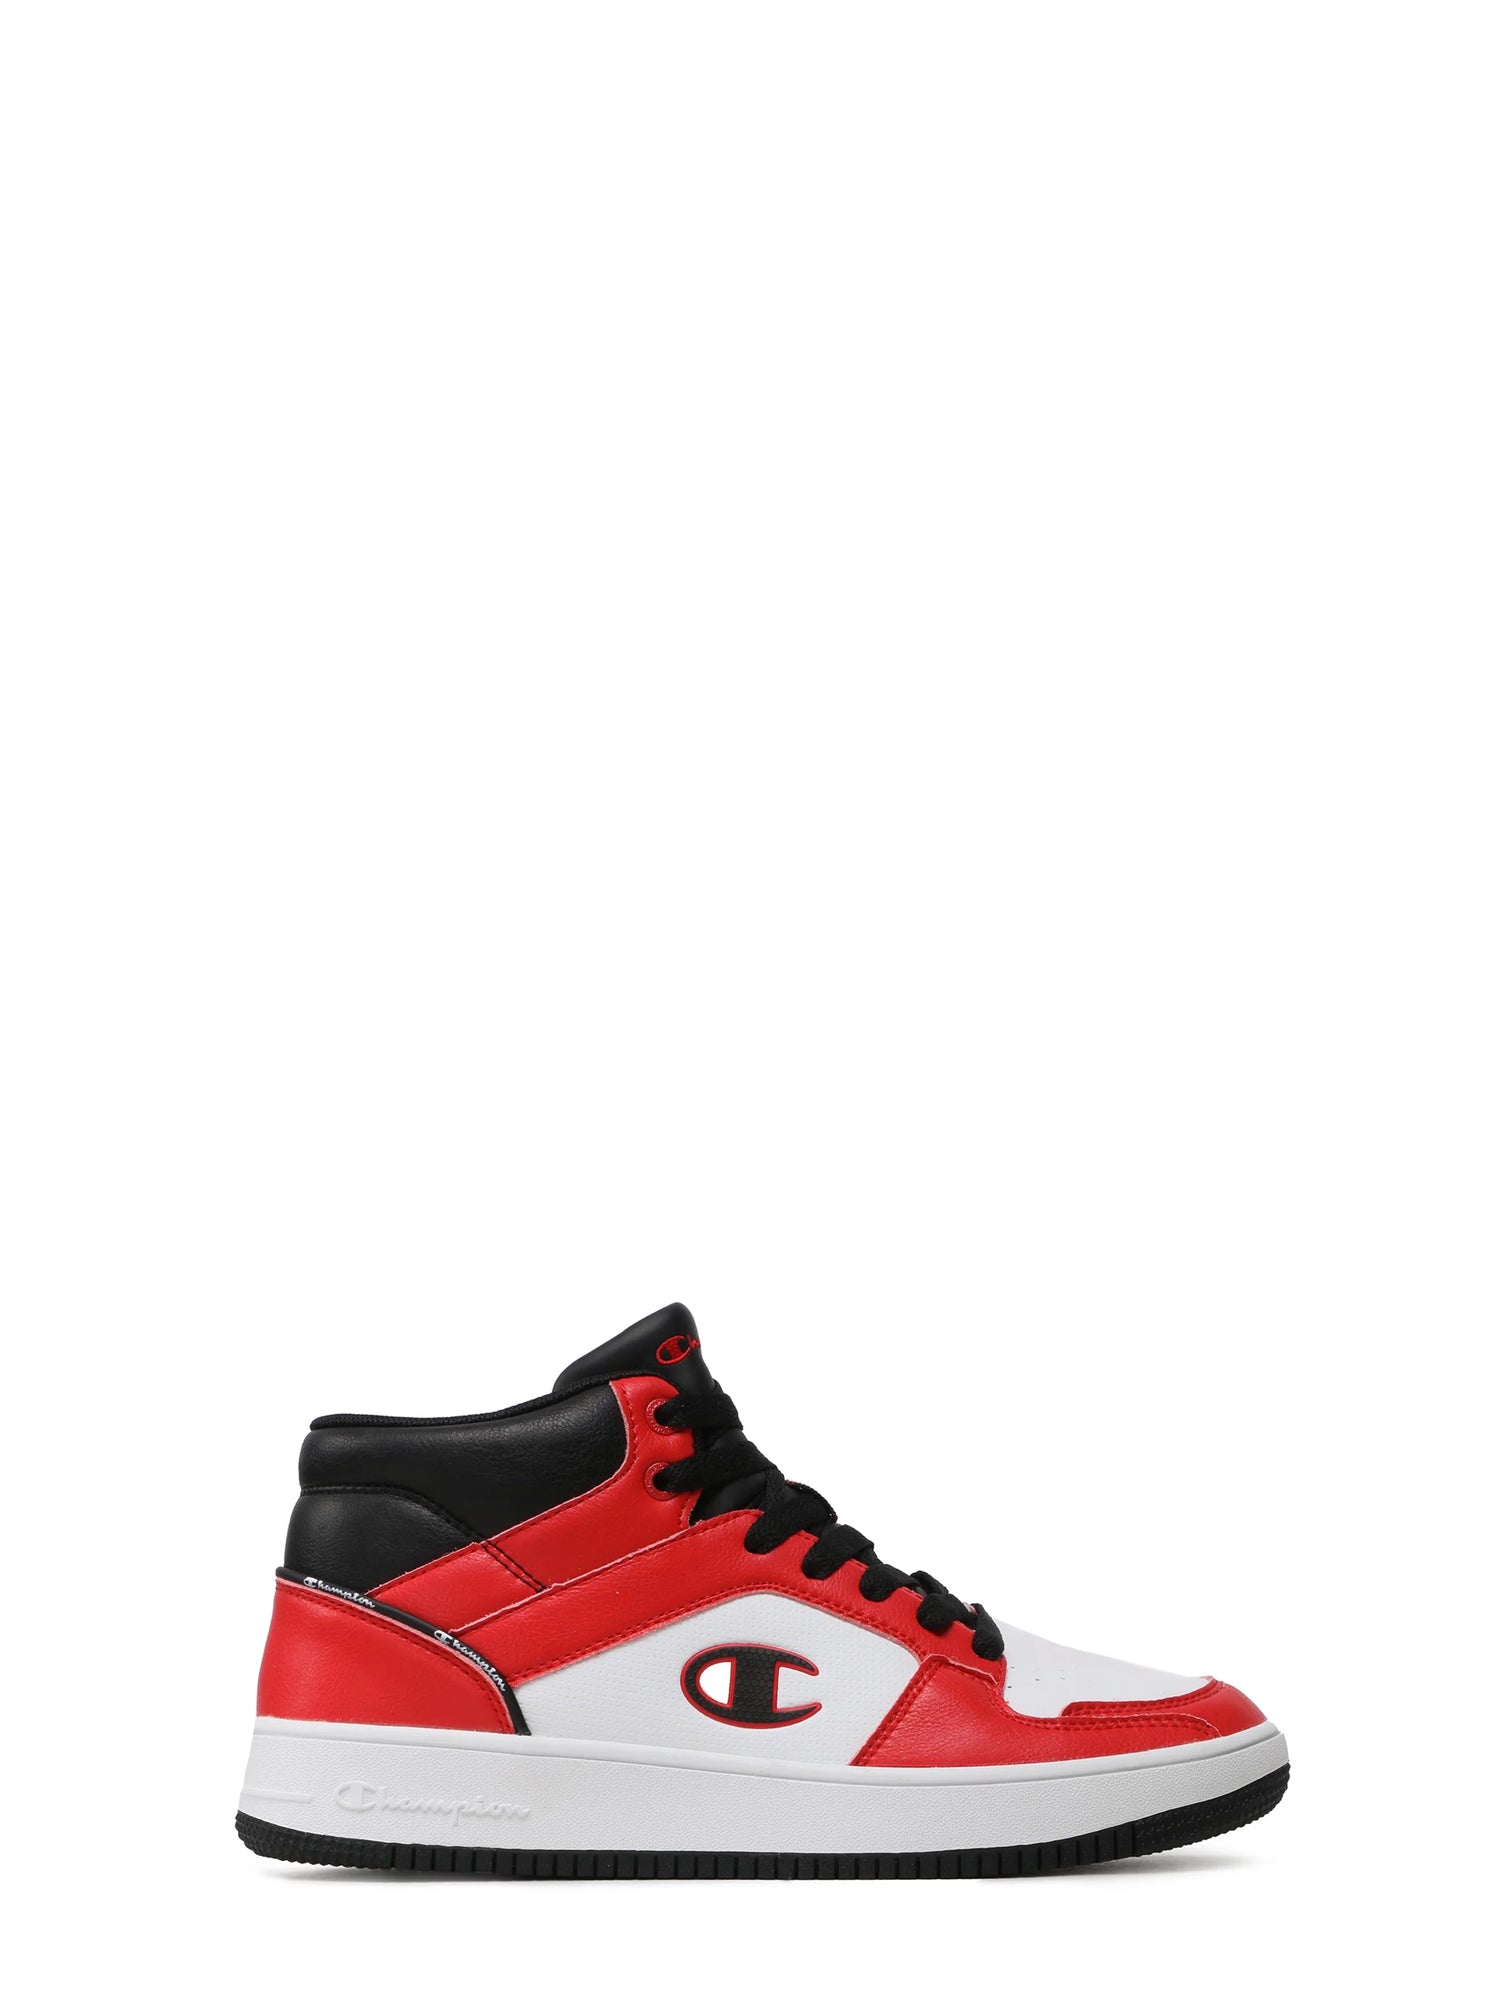 CHAMPION SNEAKERS REBOUND 2.0 MID ROSSO